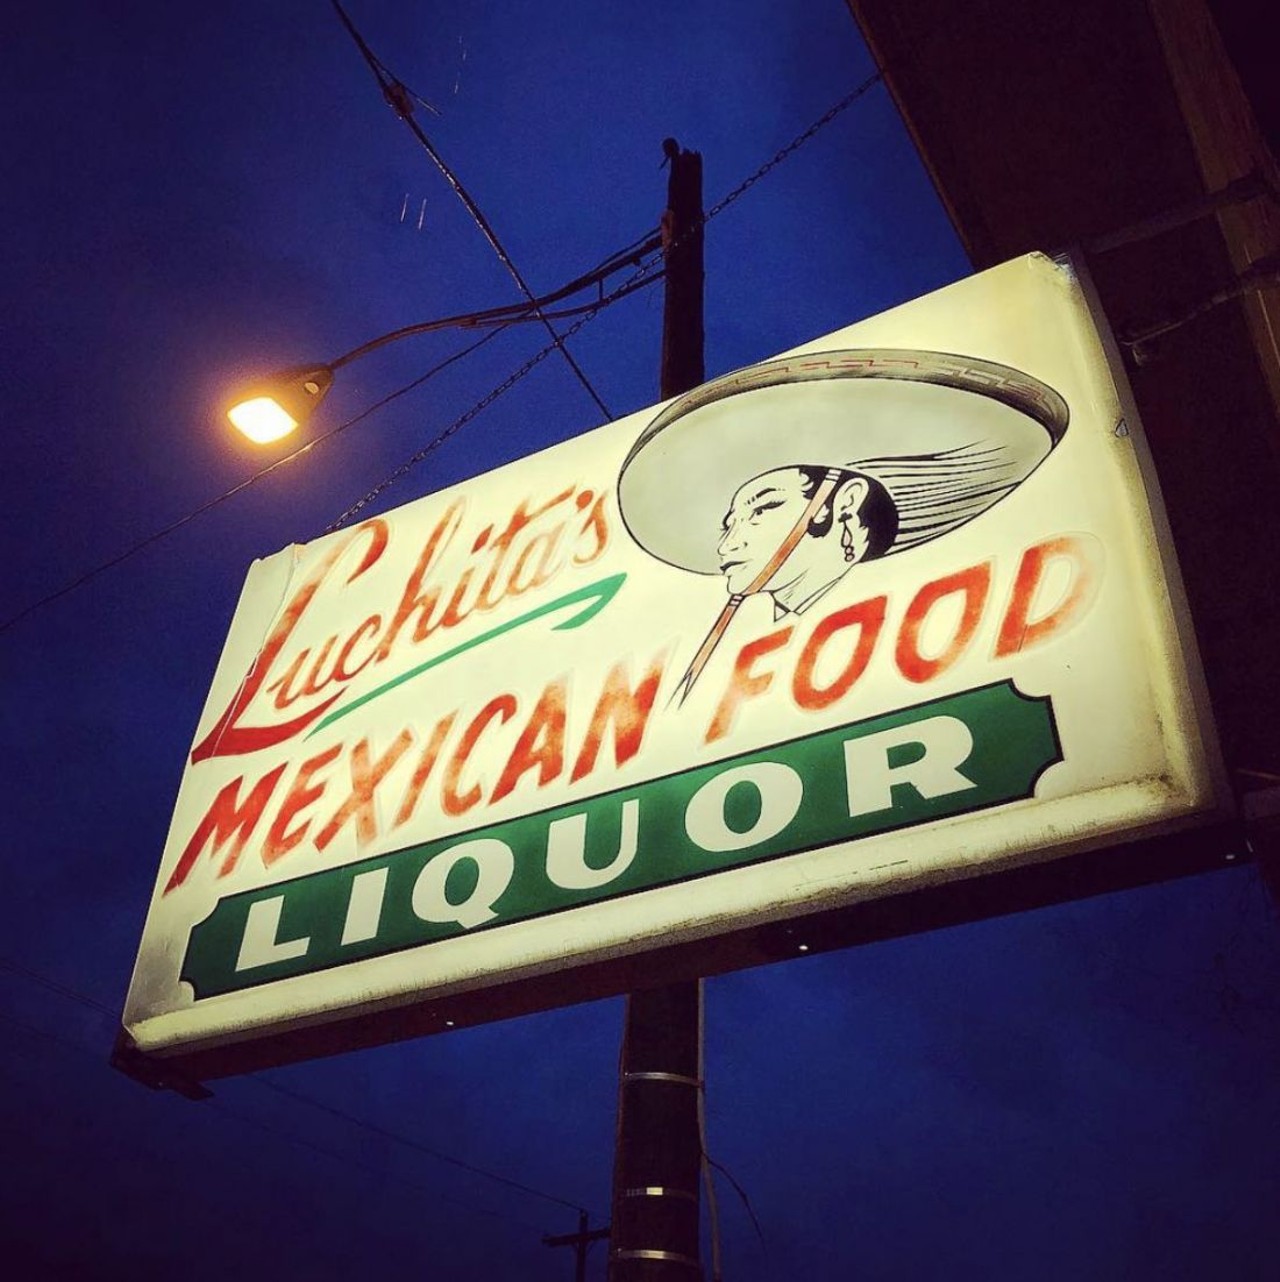  Luchita&#146;s
3456 West 117th St., Cleveland
One of the oldest Mexican joints in town, this place has been serving up food from south of the border since 1982. Luchita's is well known for its signature mole sauce, served atop enchiladas, burritos and the classic pollo en mole poblano. The eatery excels at incorporating the rich flavors of ancho, chipotle and poblano peppers into various entrees, showcasing a complexity often lost elsewhere.
Photo via @ScottBeNimble/Instagram